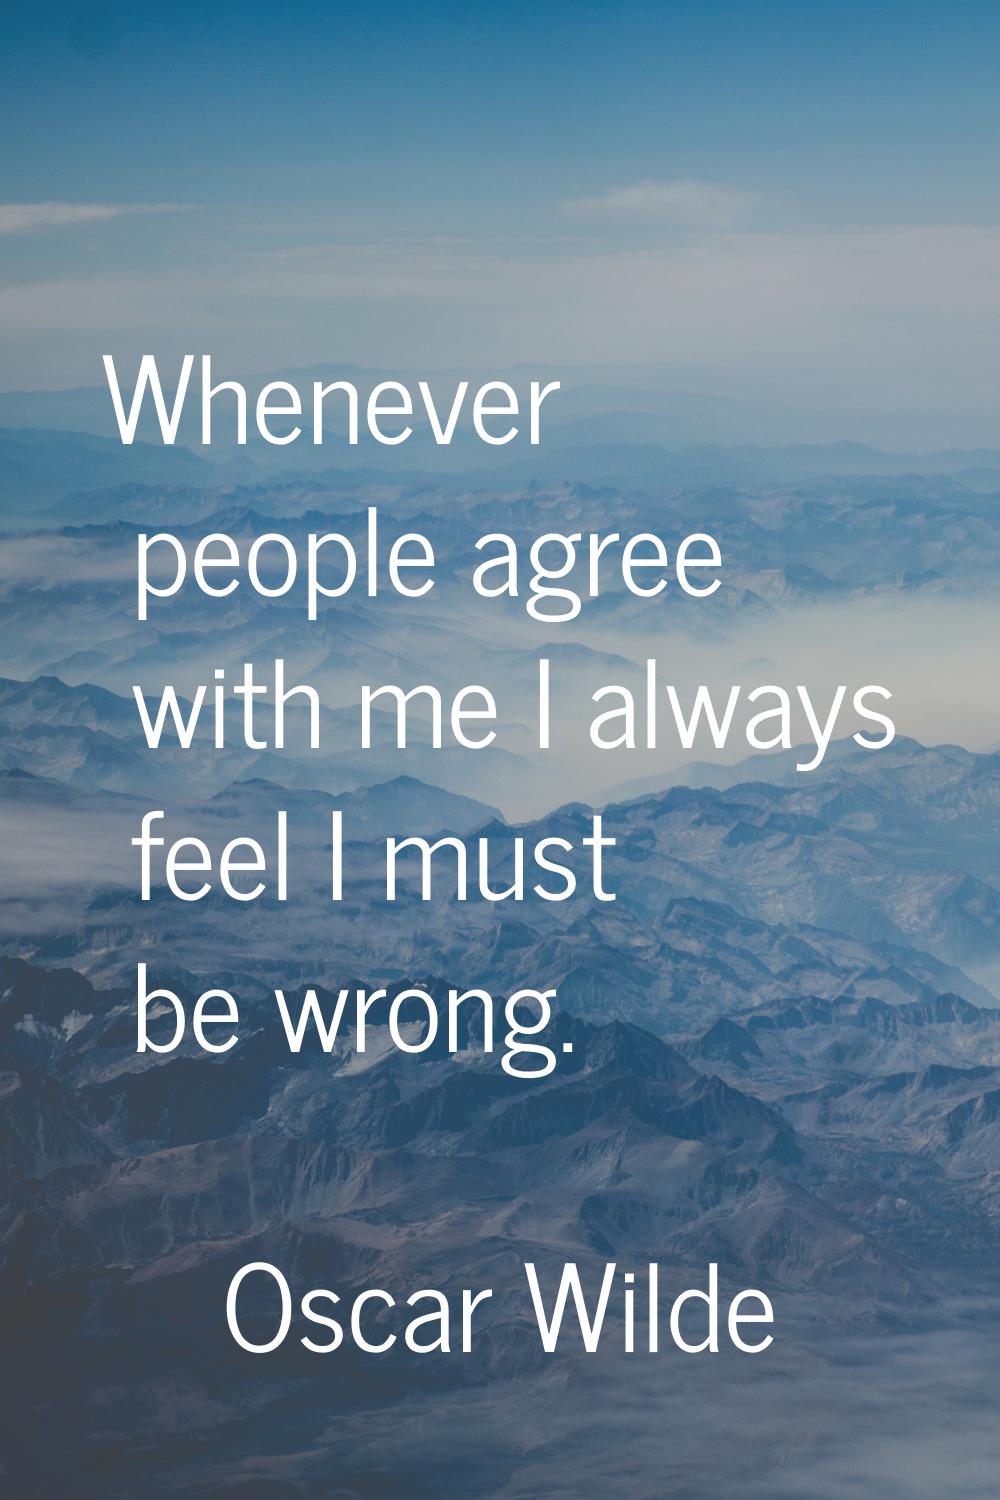 Whenever people agree with me I always feel I must be wrong.